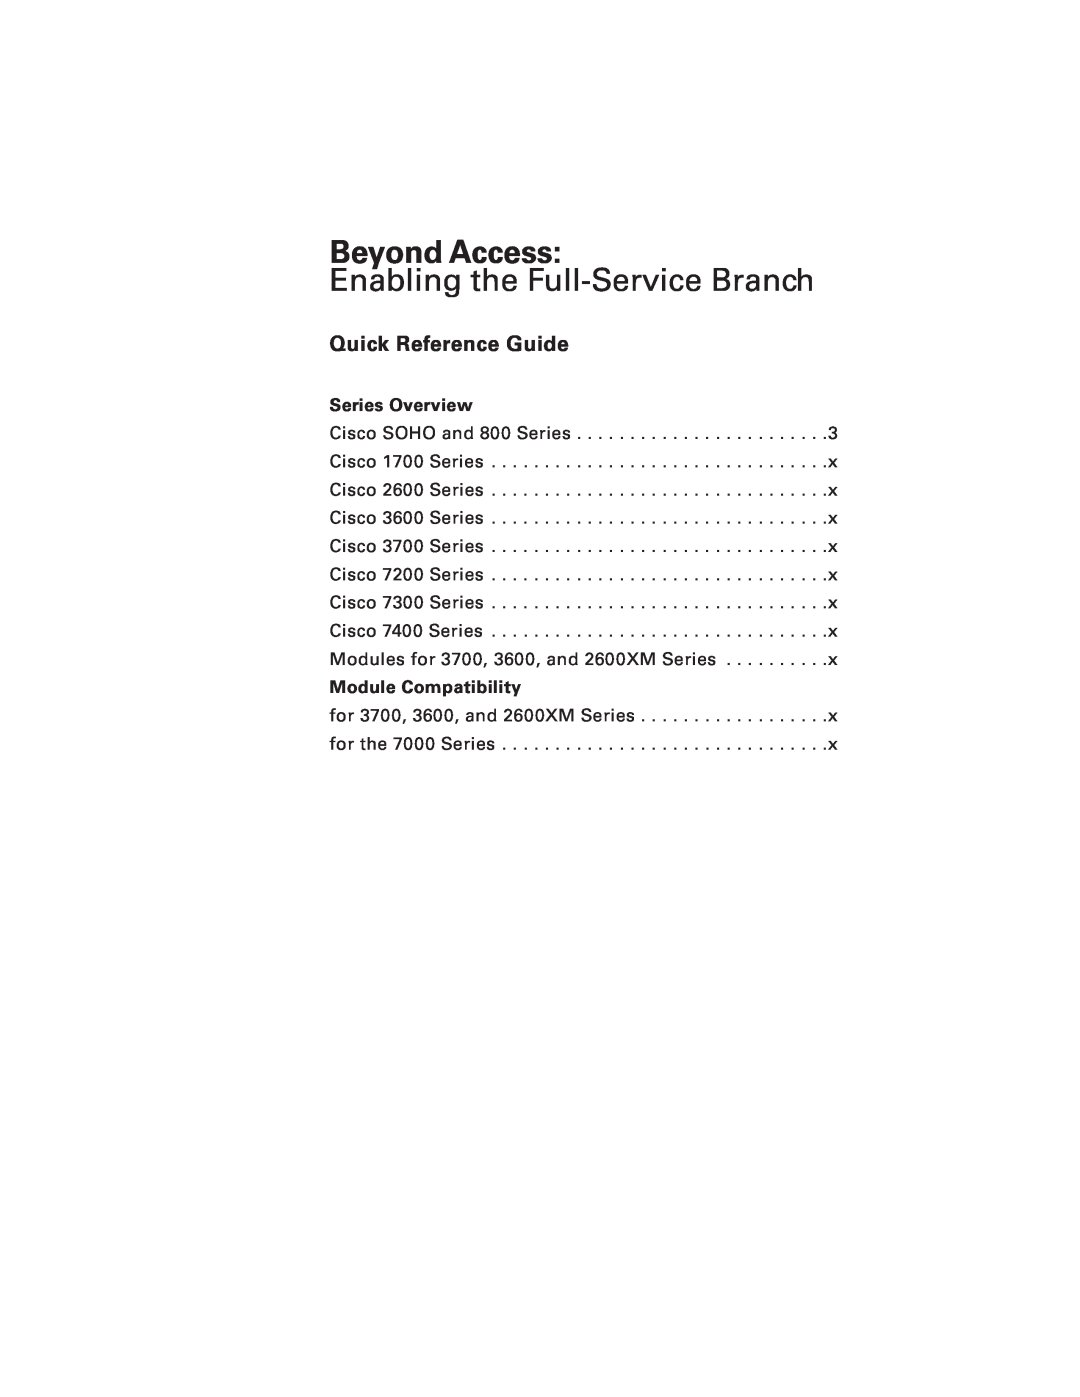 Cisco Systems 7200, 7300, 7400 manual Beyond Access, Enabling the Full-Service Branch, Quick Reference Guide, Series Overview 